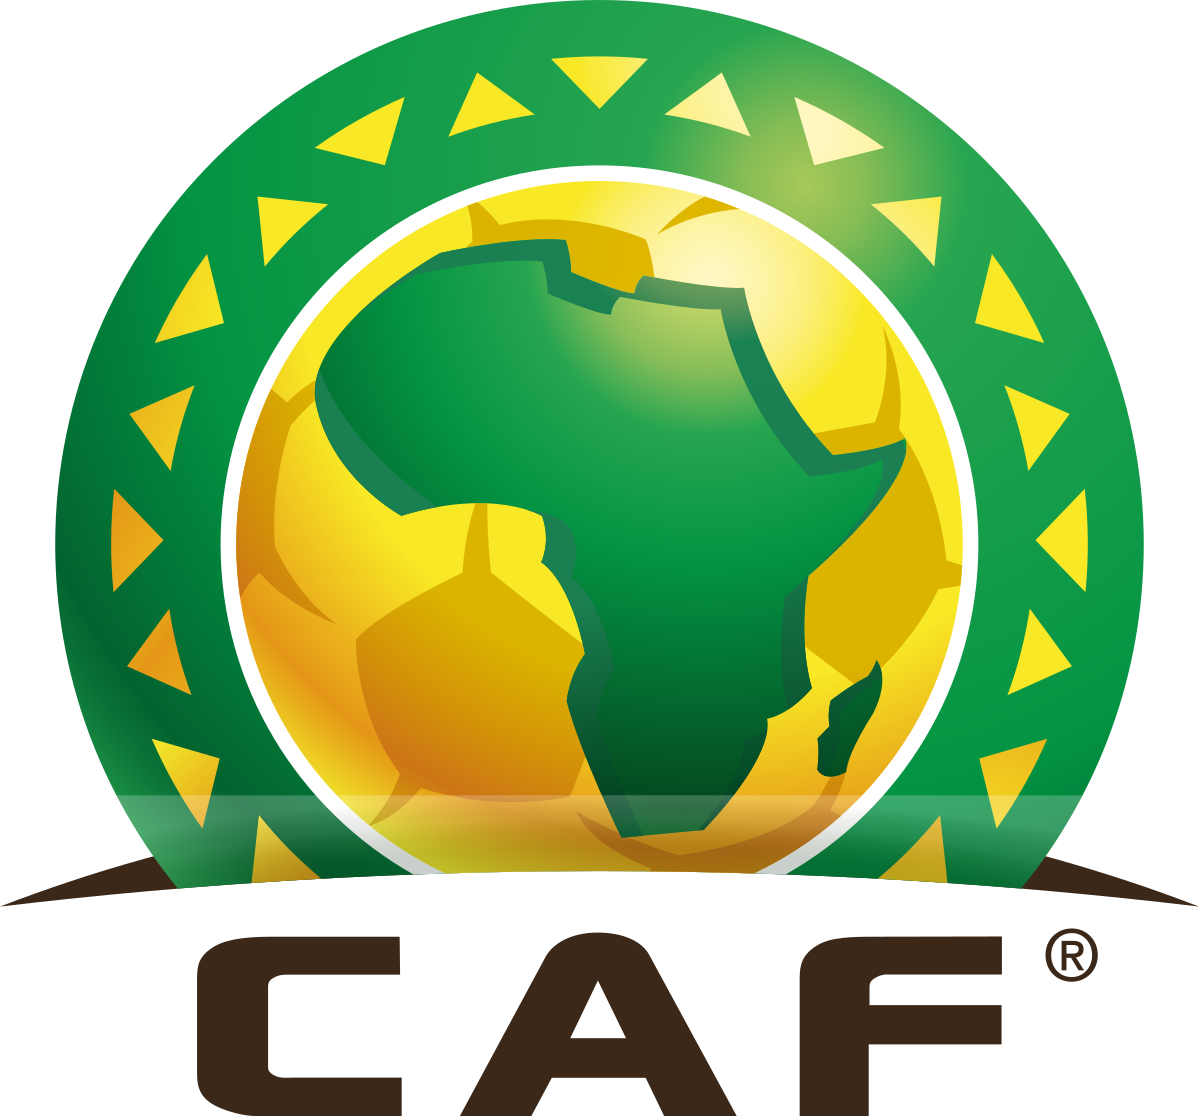 African Federations